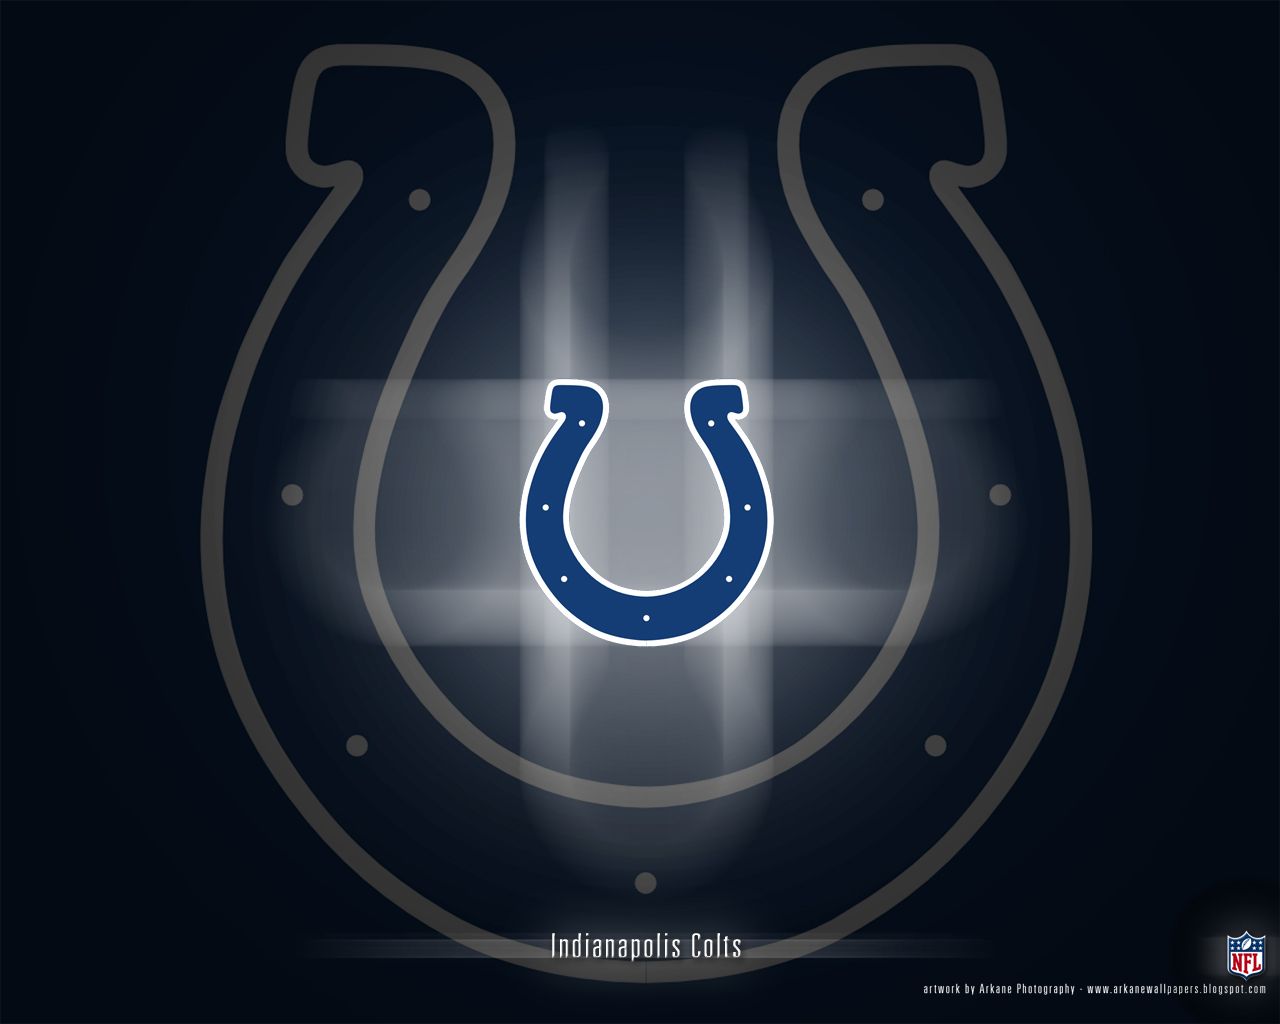 Free download Colts Wallpaper Indianapolis Colts Computer